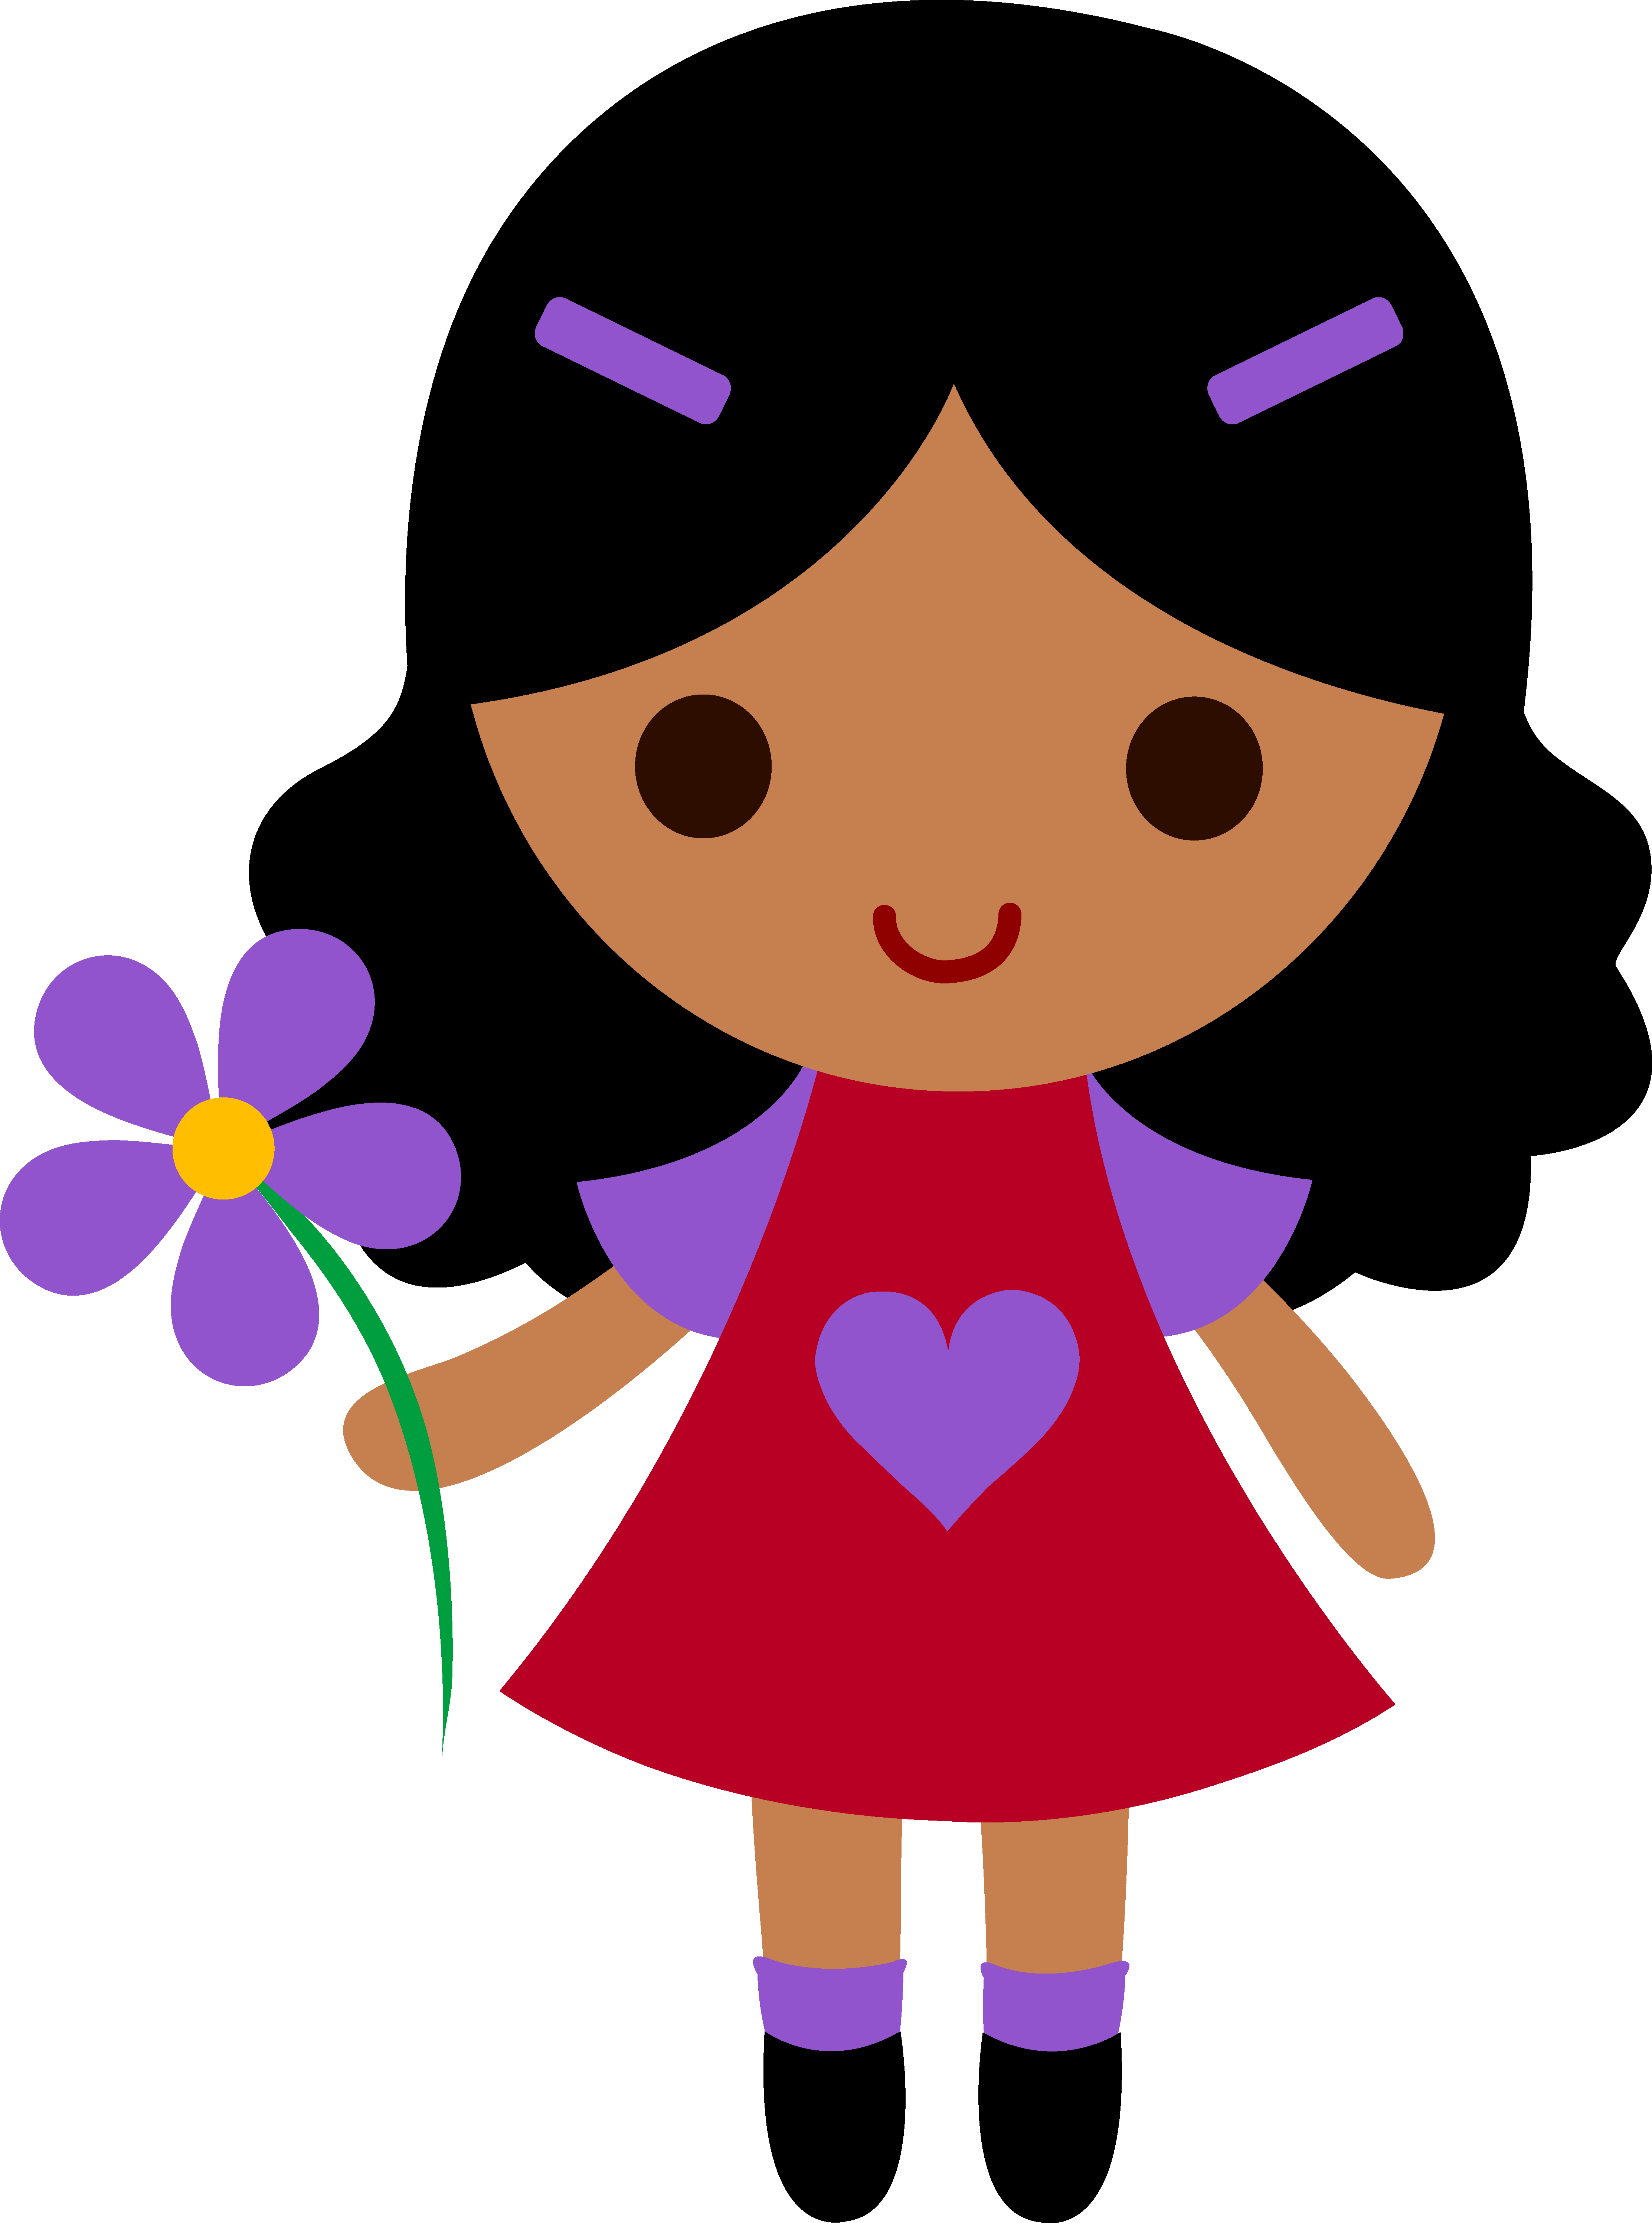 Cute Cartoon Girl PNG Transparent Picture | PNG Mart